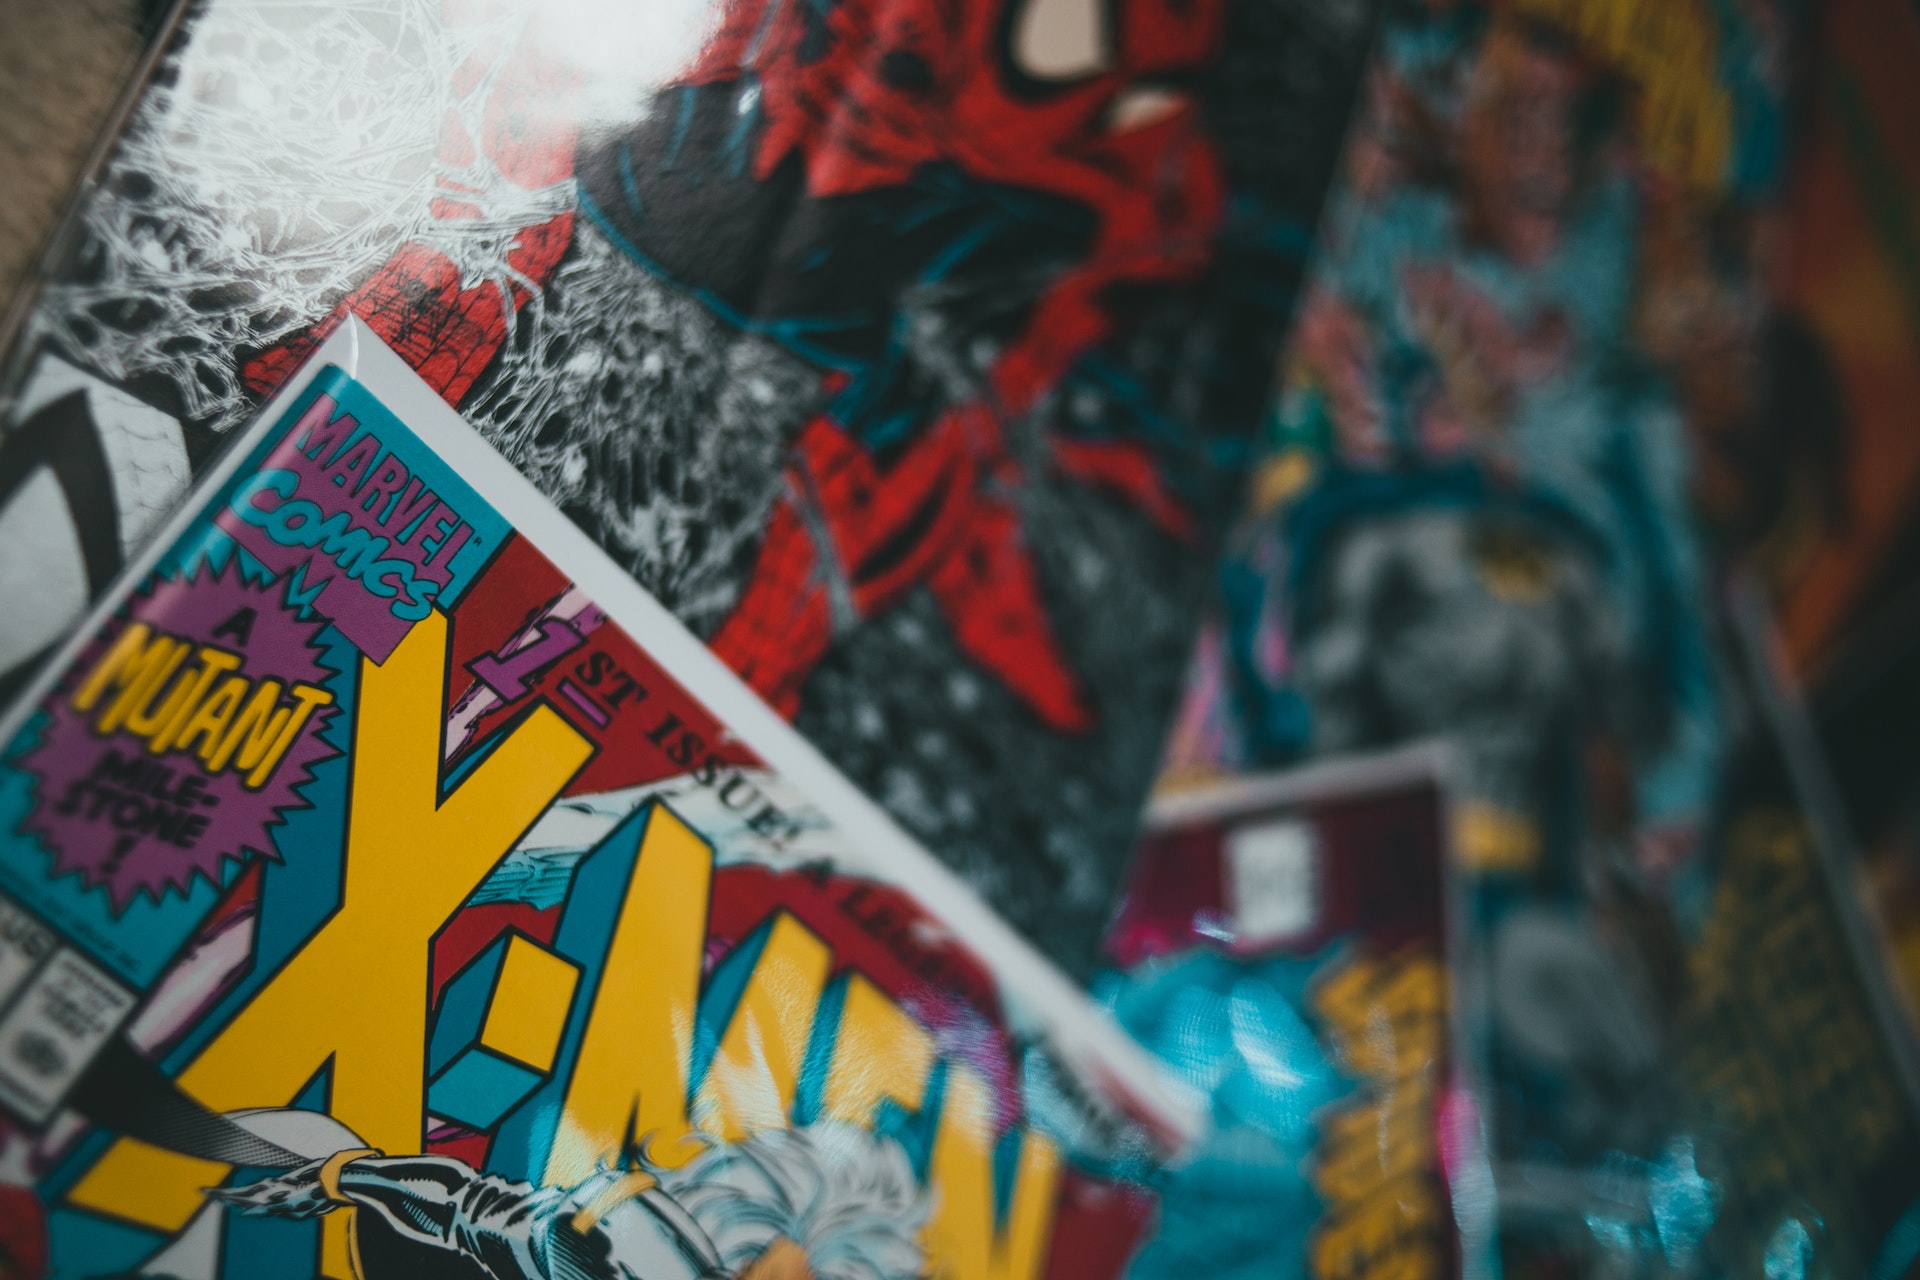 A close up image of comic book covers.